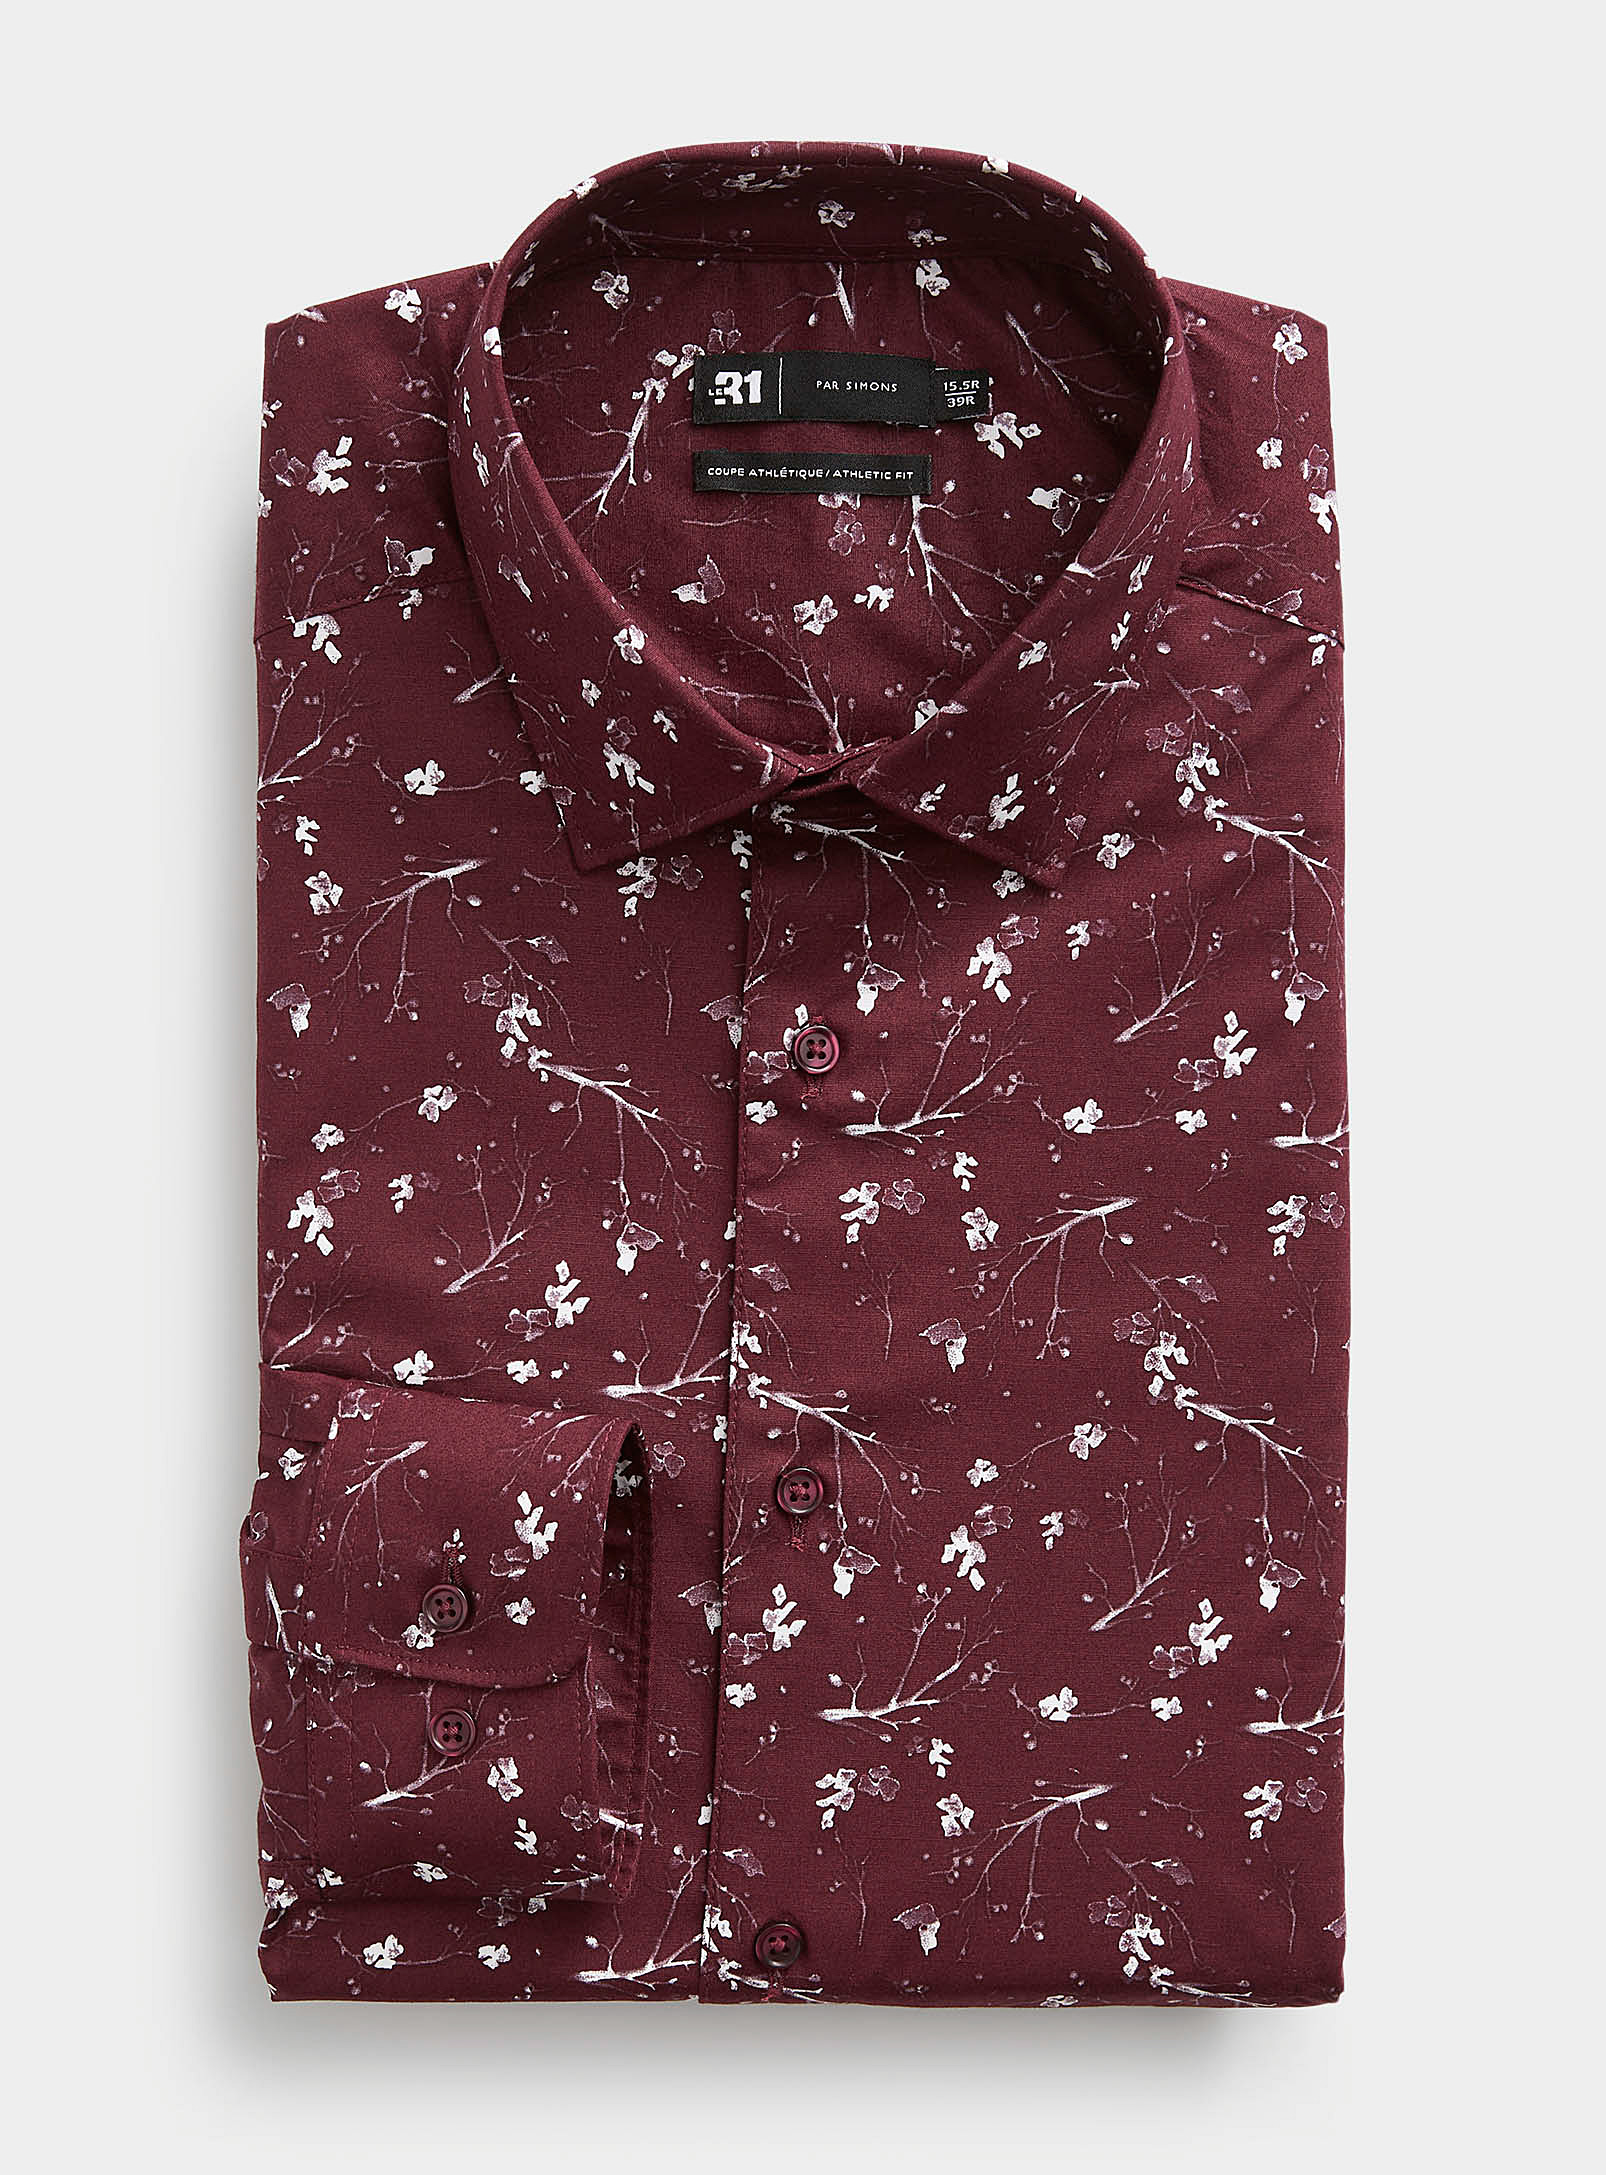 Le 31 Plant Silhouette Burgundy Shirt Athletic Fit In Ruby Red